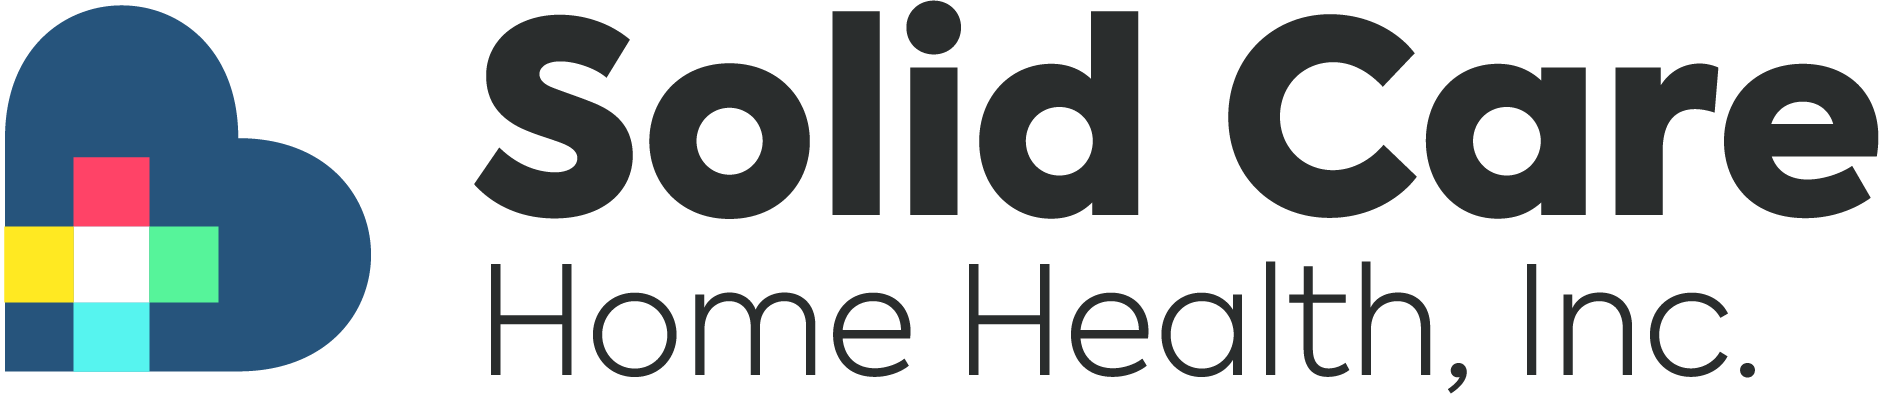 12. Solid Care Home Health (Bronce)